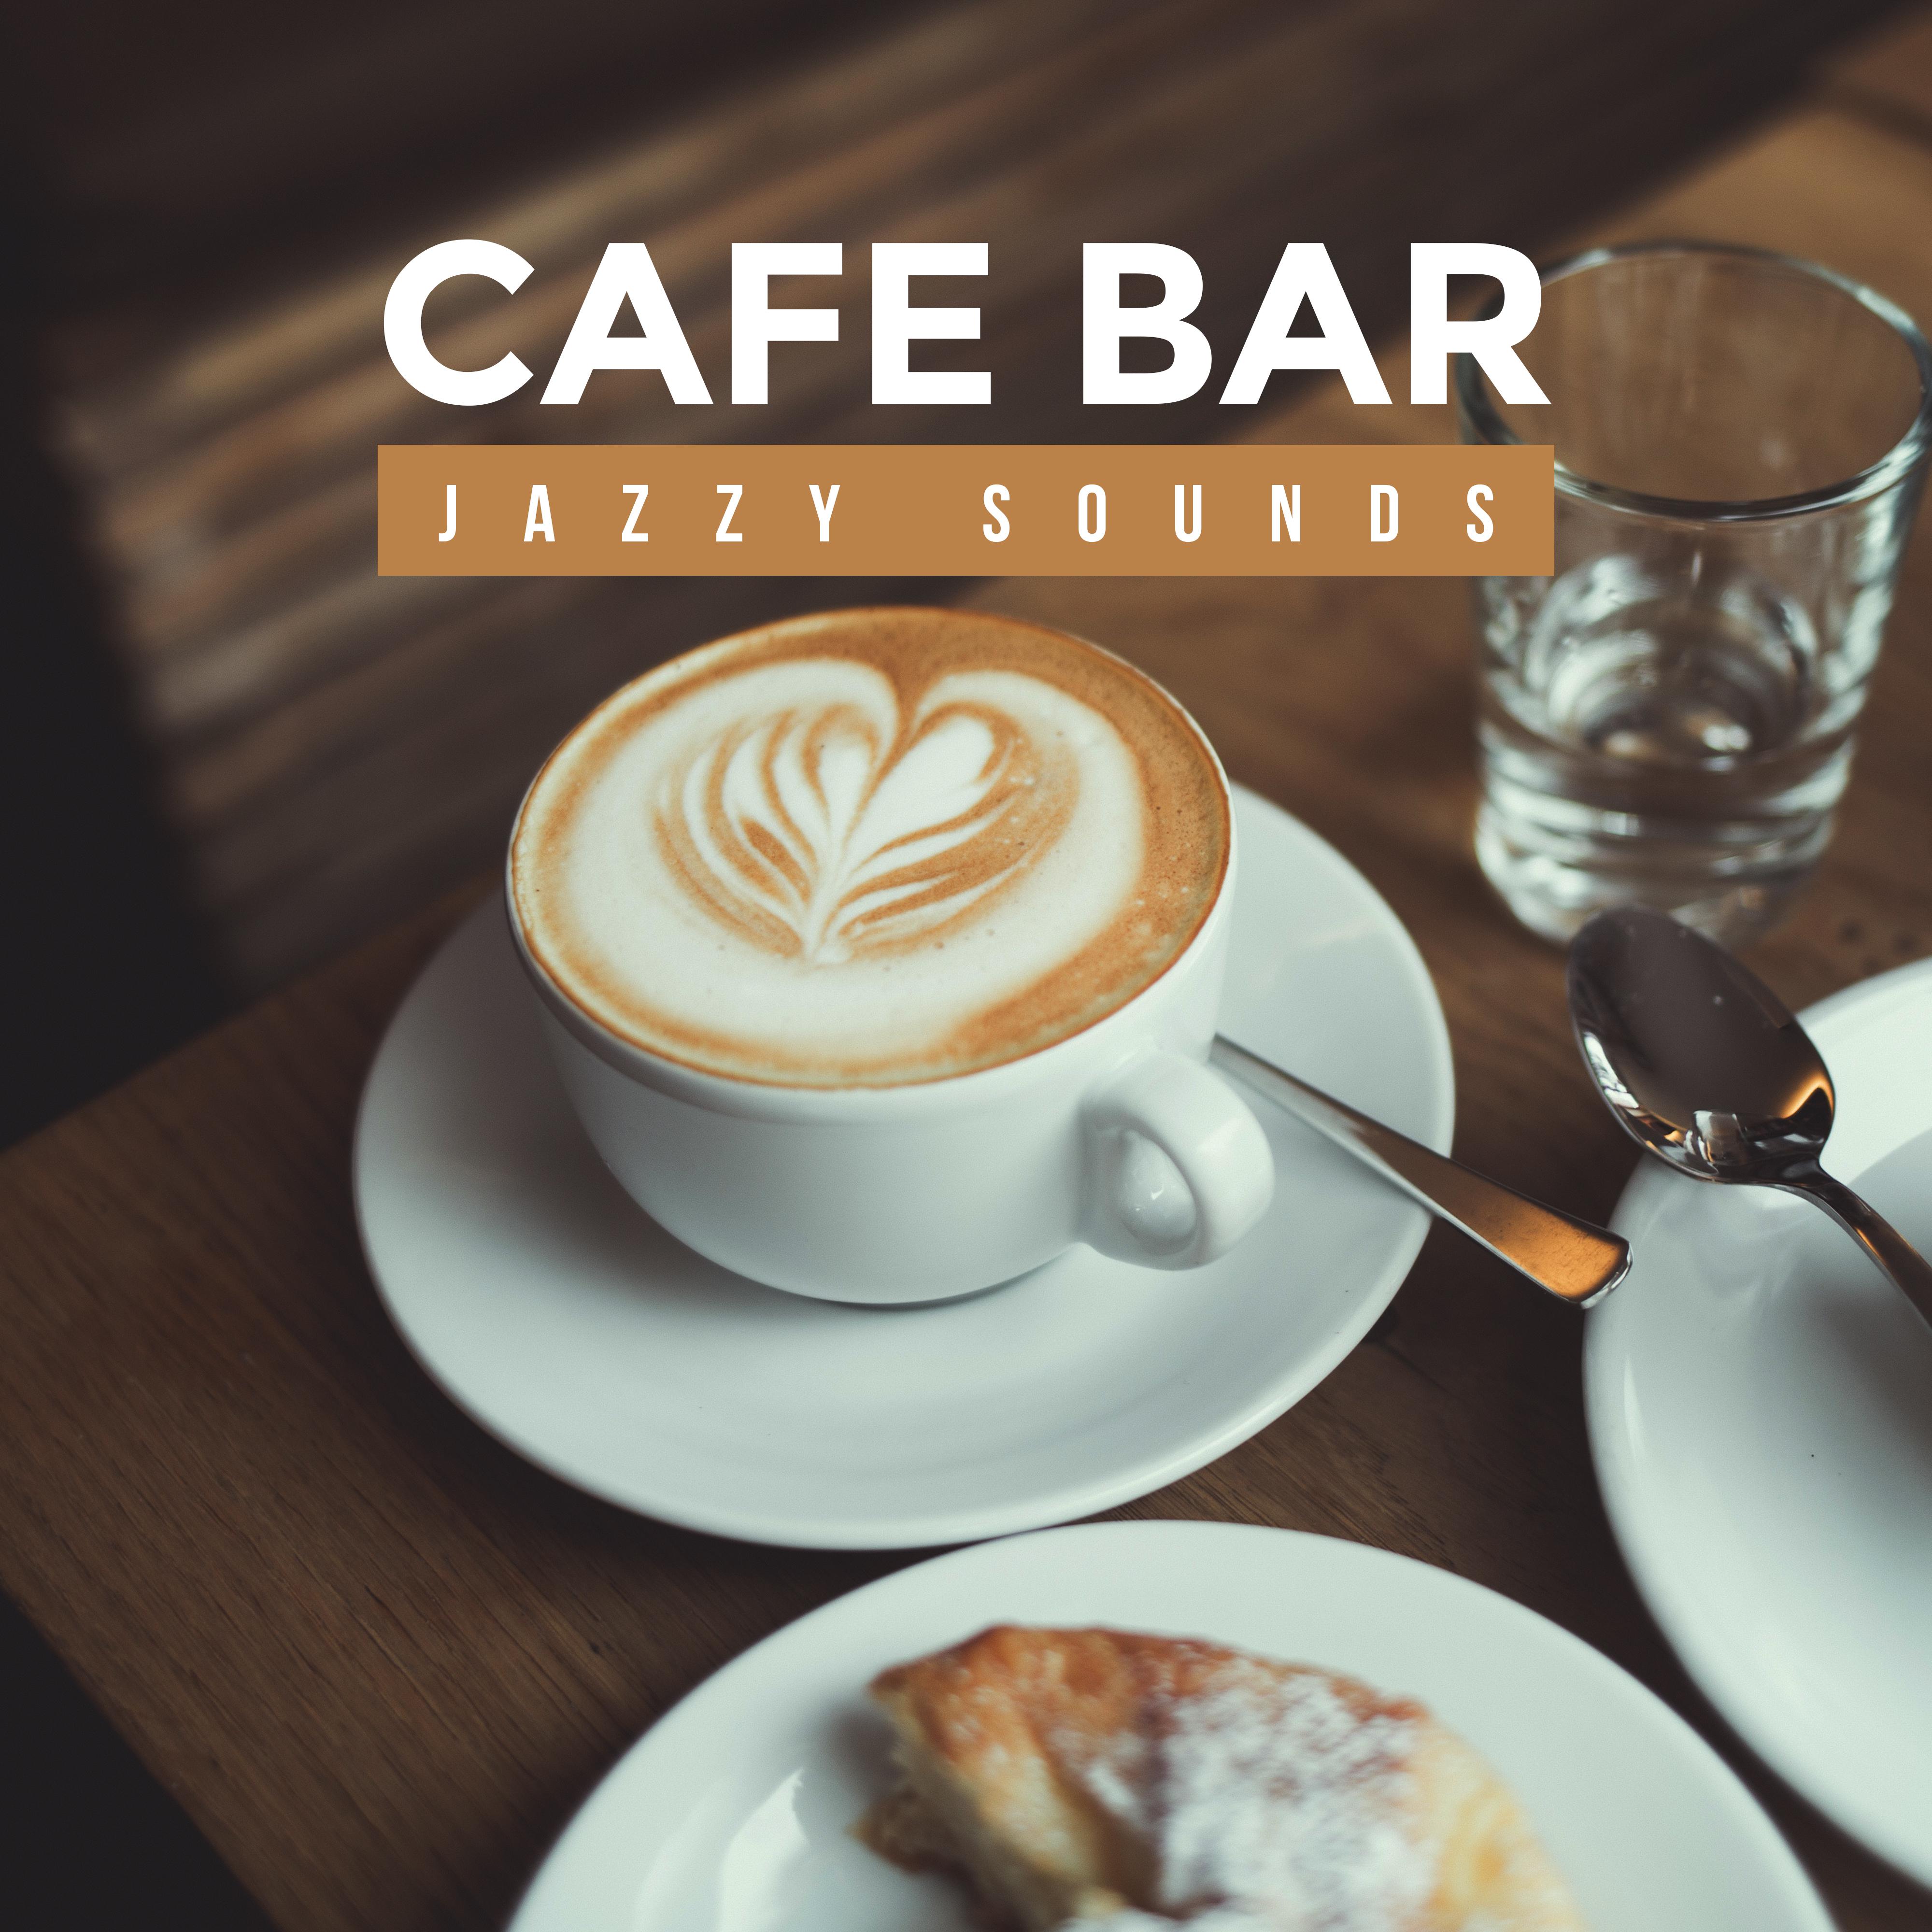 Cafe Bar Jazzy Sounds: Top 2019 Smooth Jazz Music, Perfect Background for Cafe & Restaurant, Friends Meeting Music